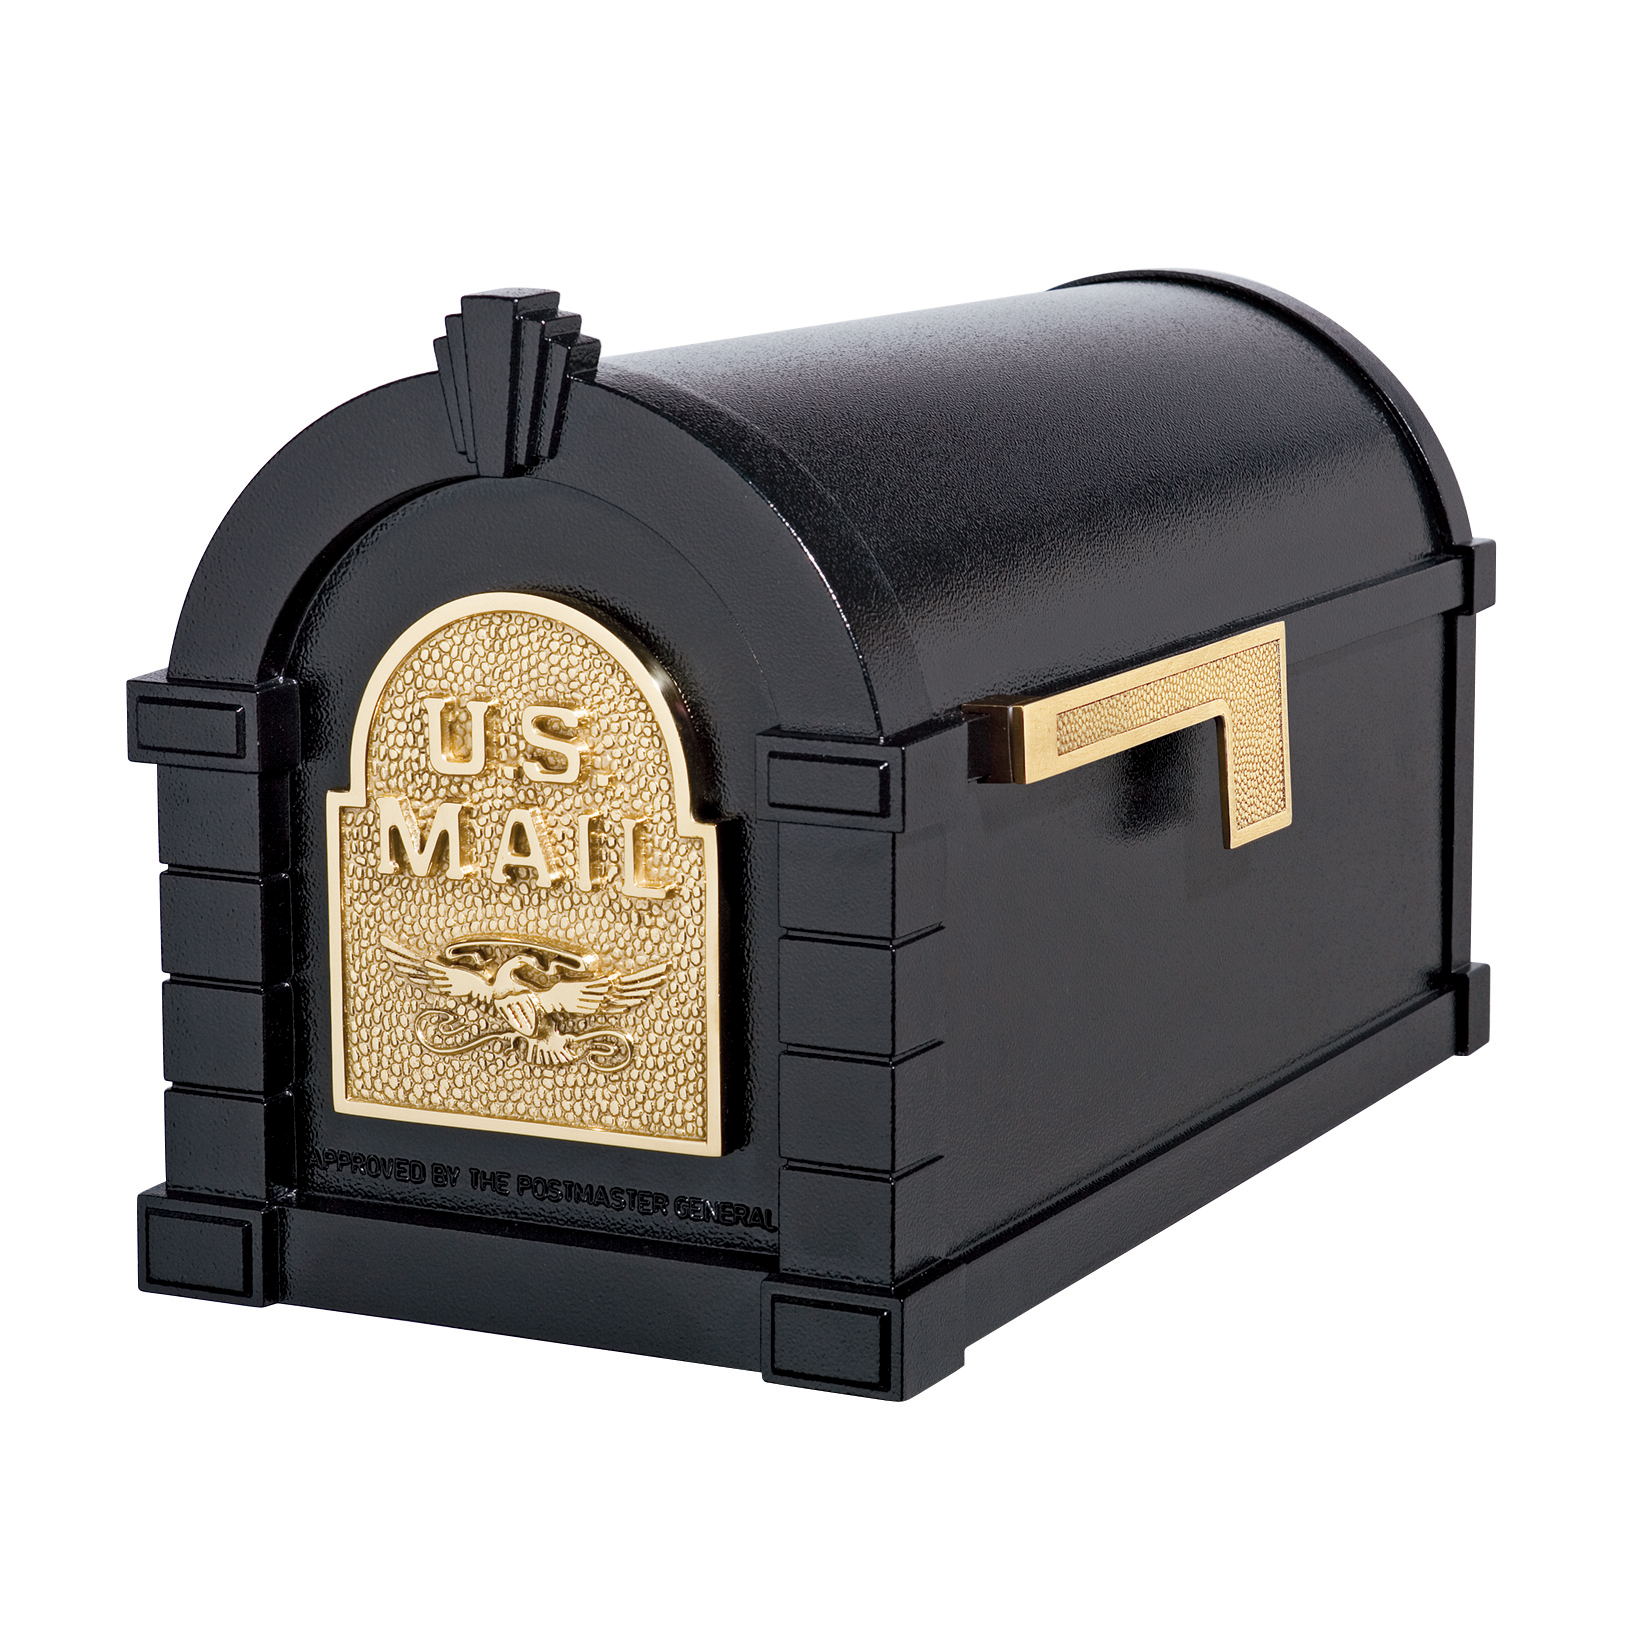 Gaines Eagle Keystone Mailboxes - Black with Polished Brass